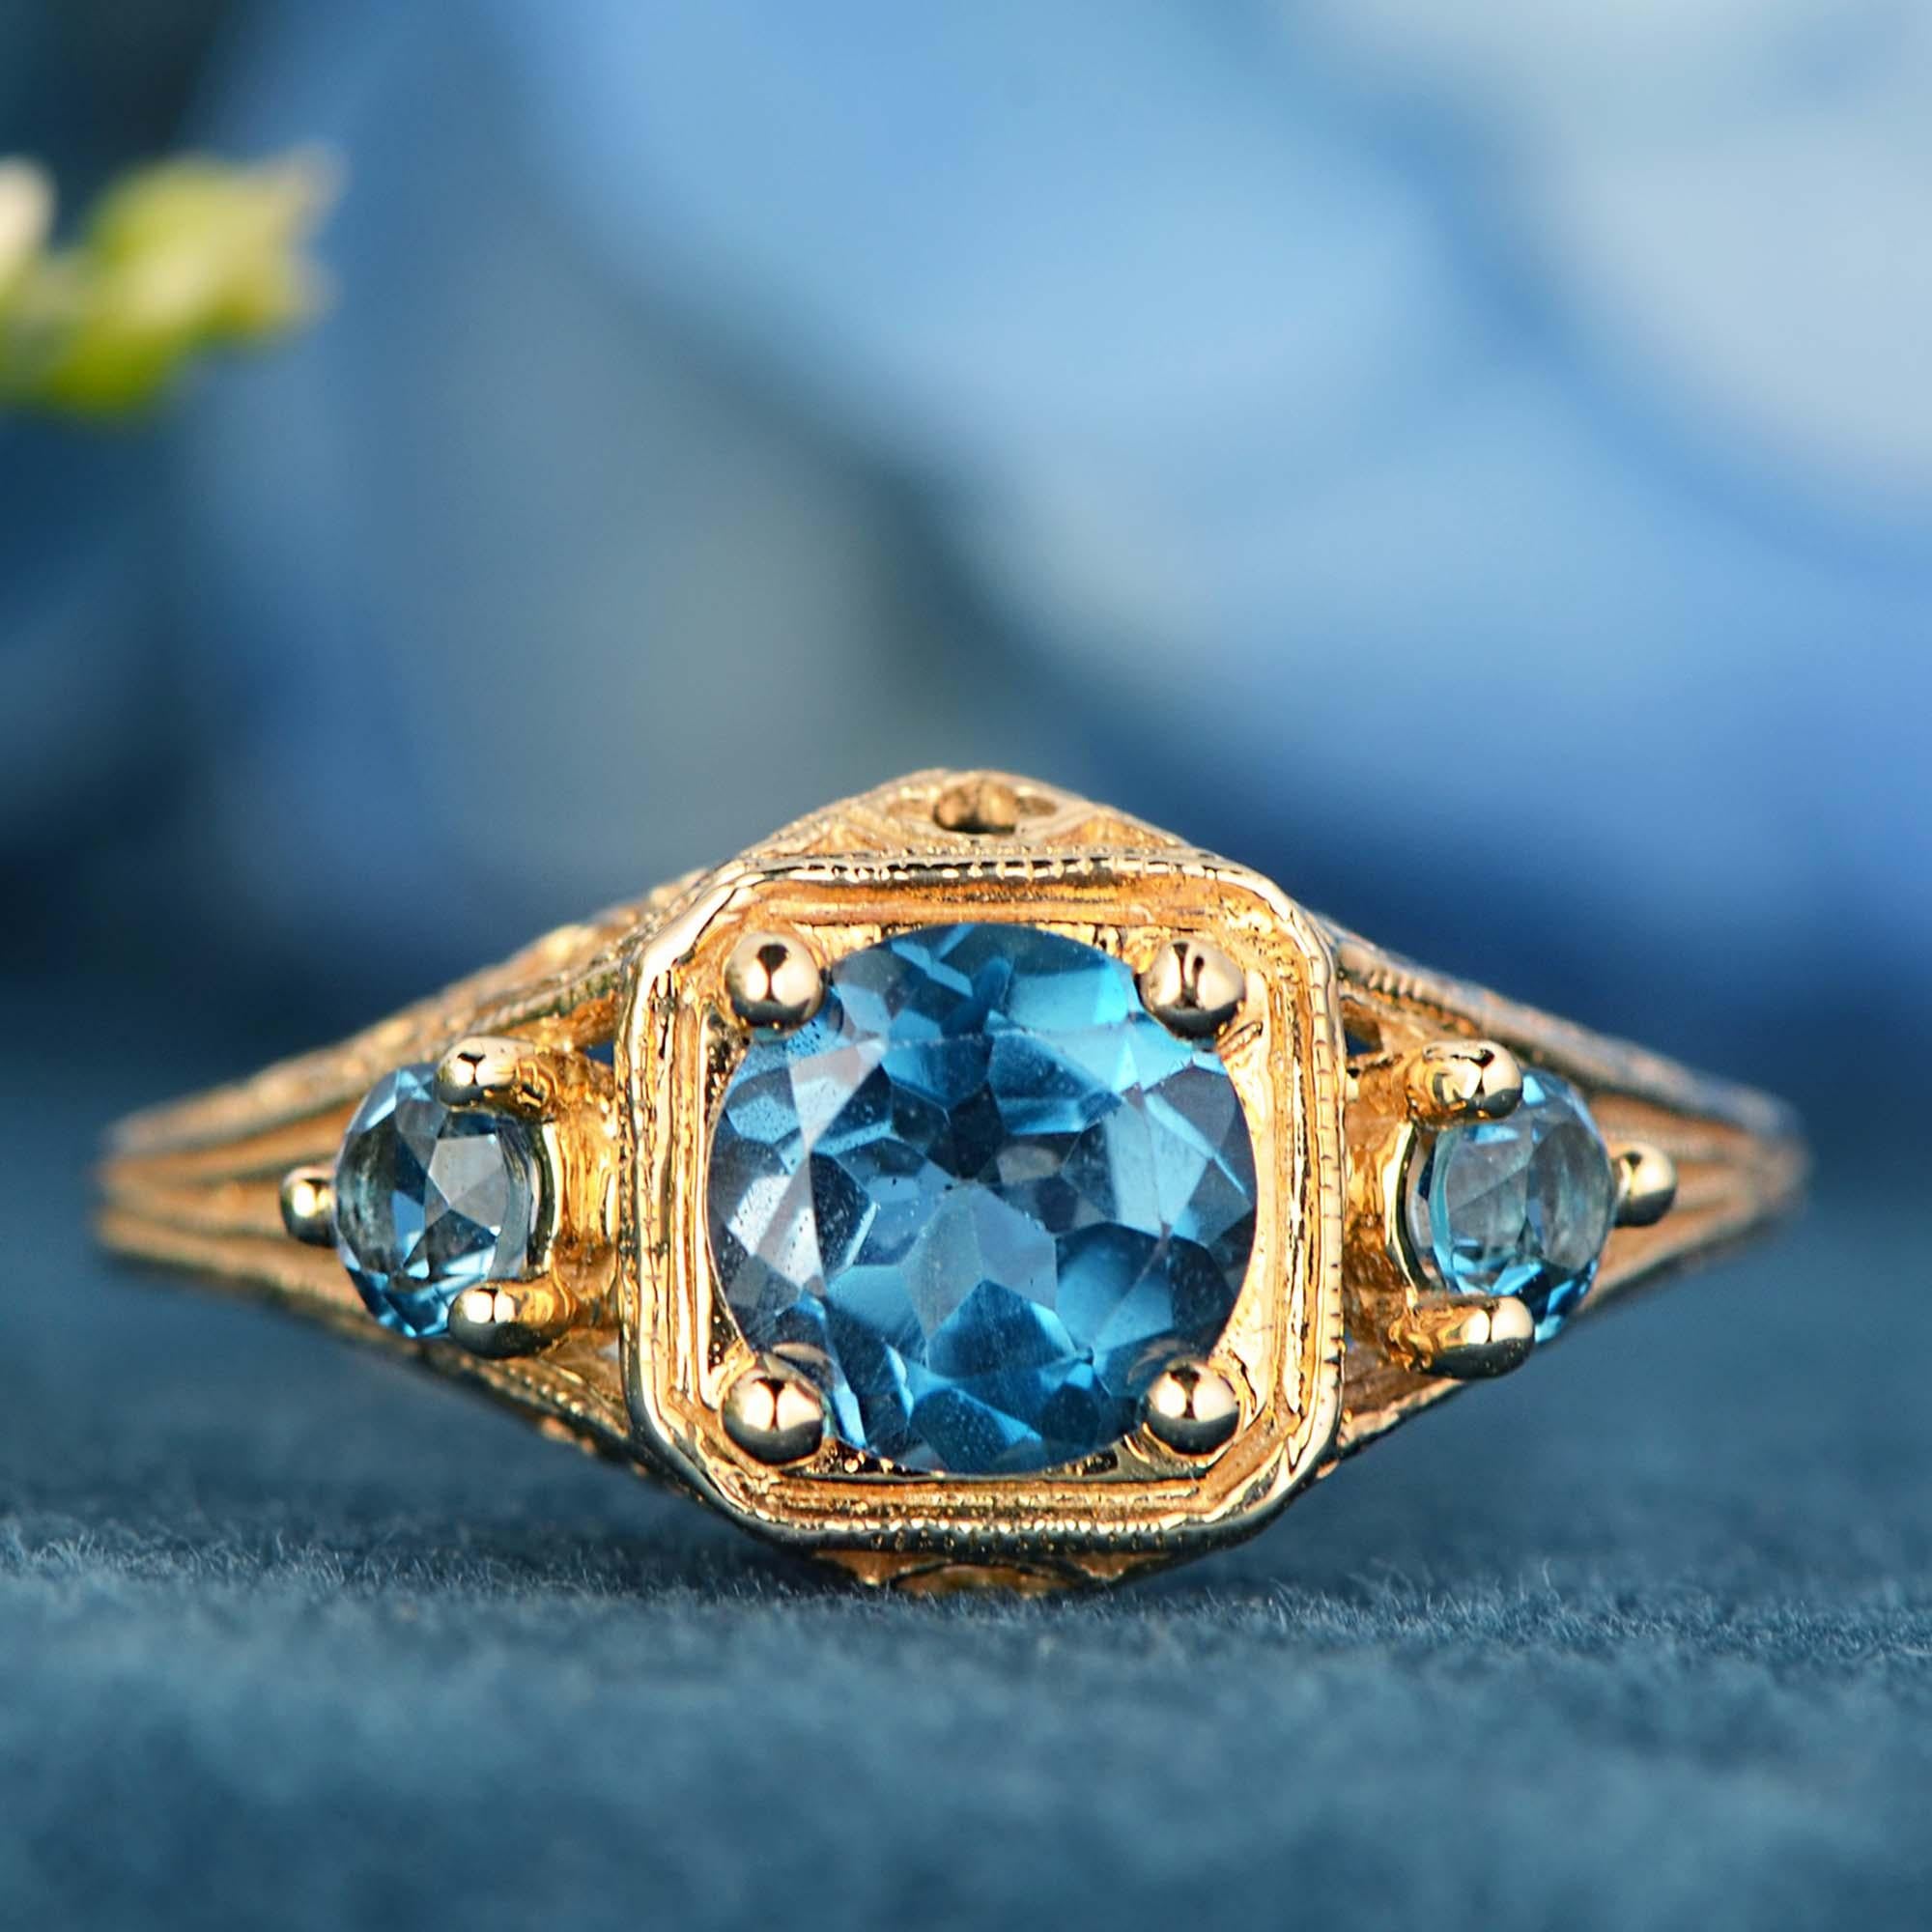 For Sale:  Natural London Blue Topaz Vintage Style Filigree Three Stone Ring in 9K Gold 2